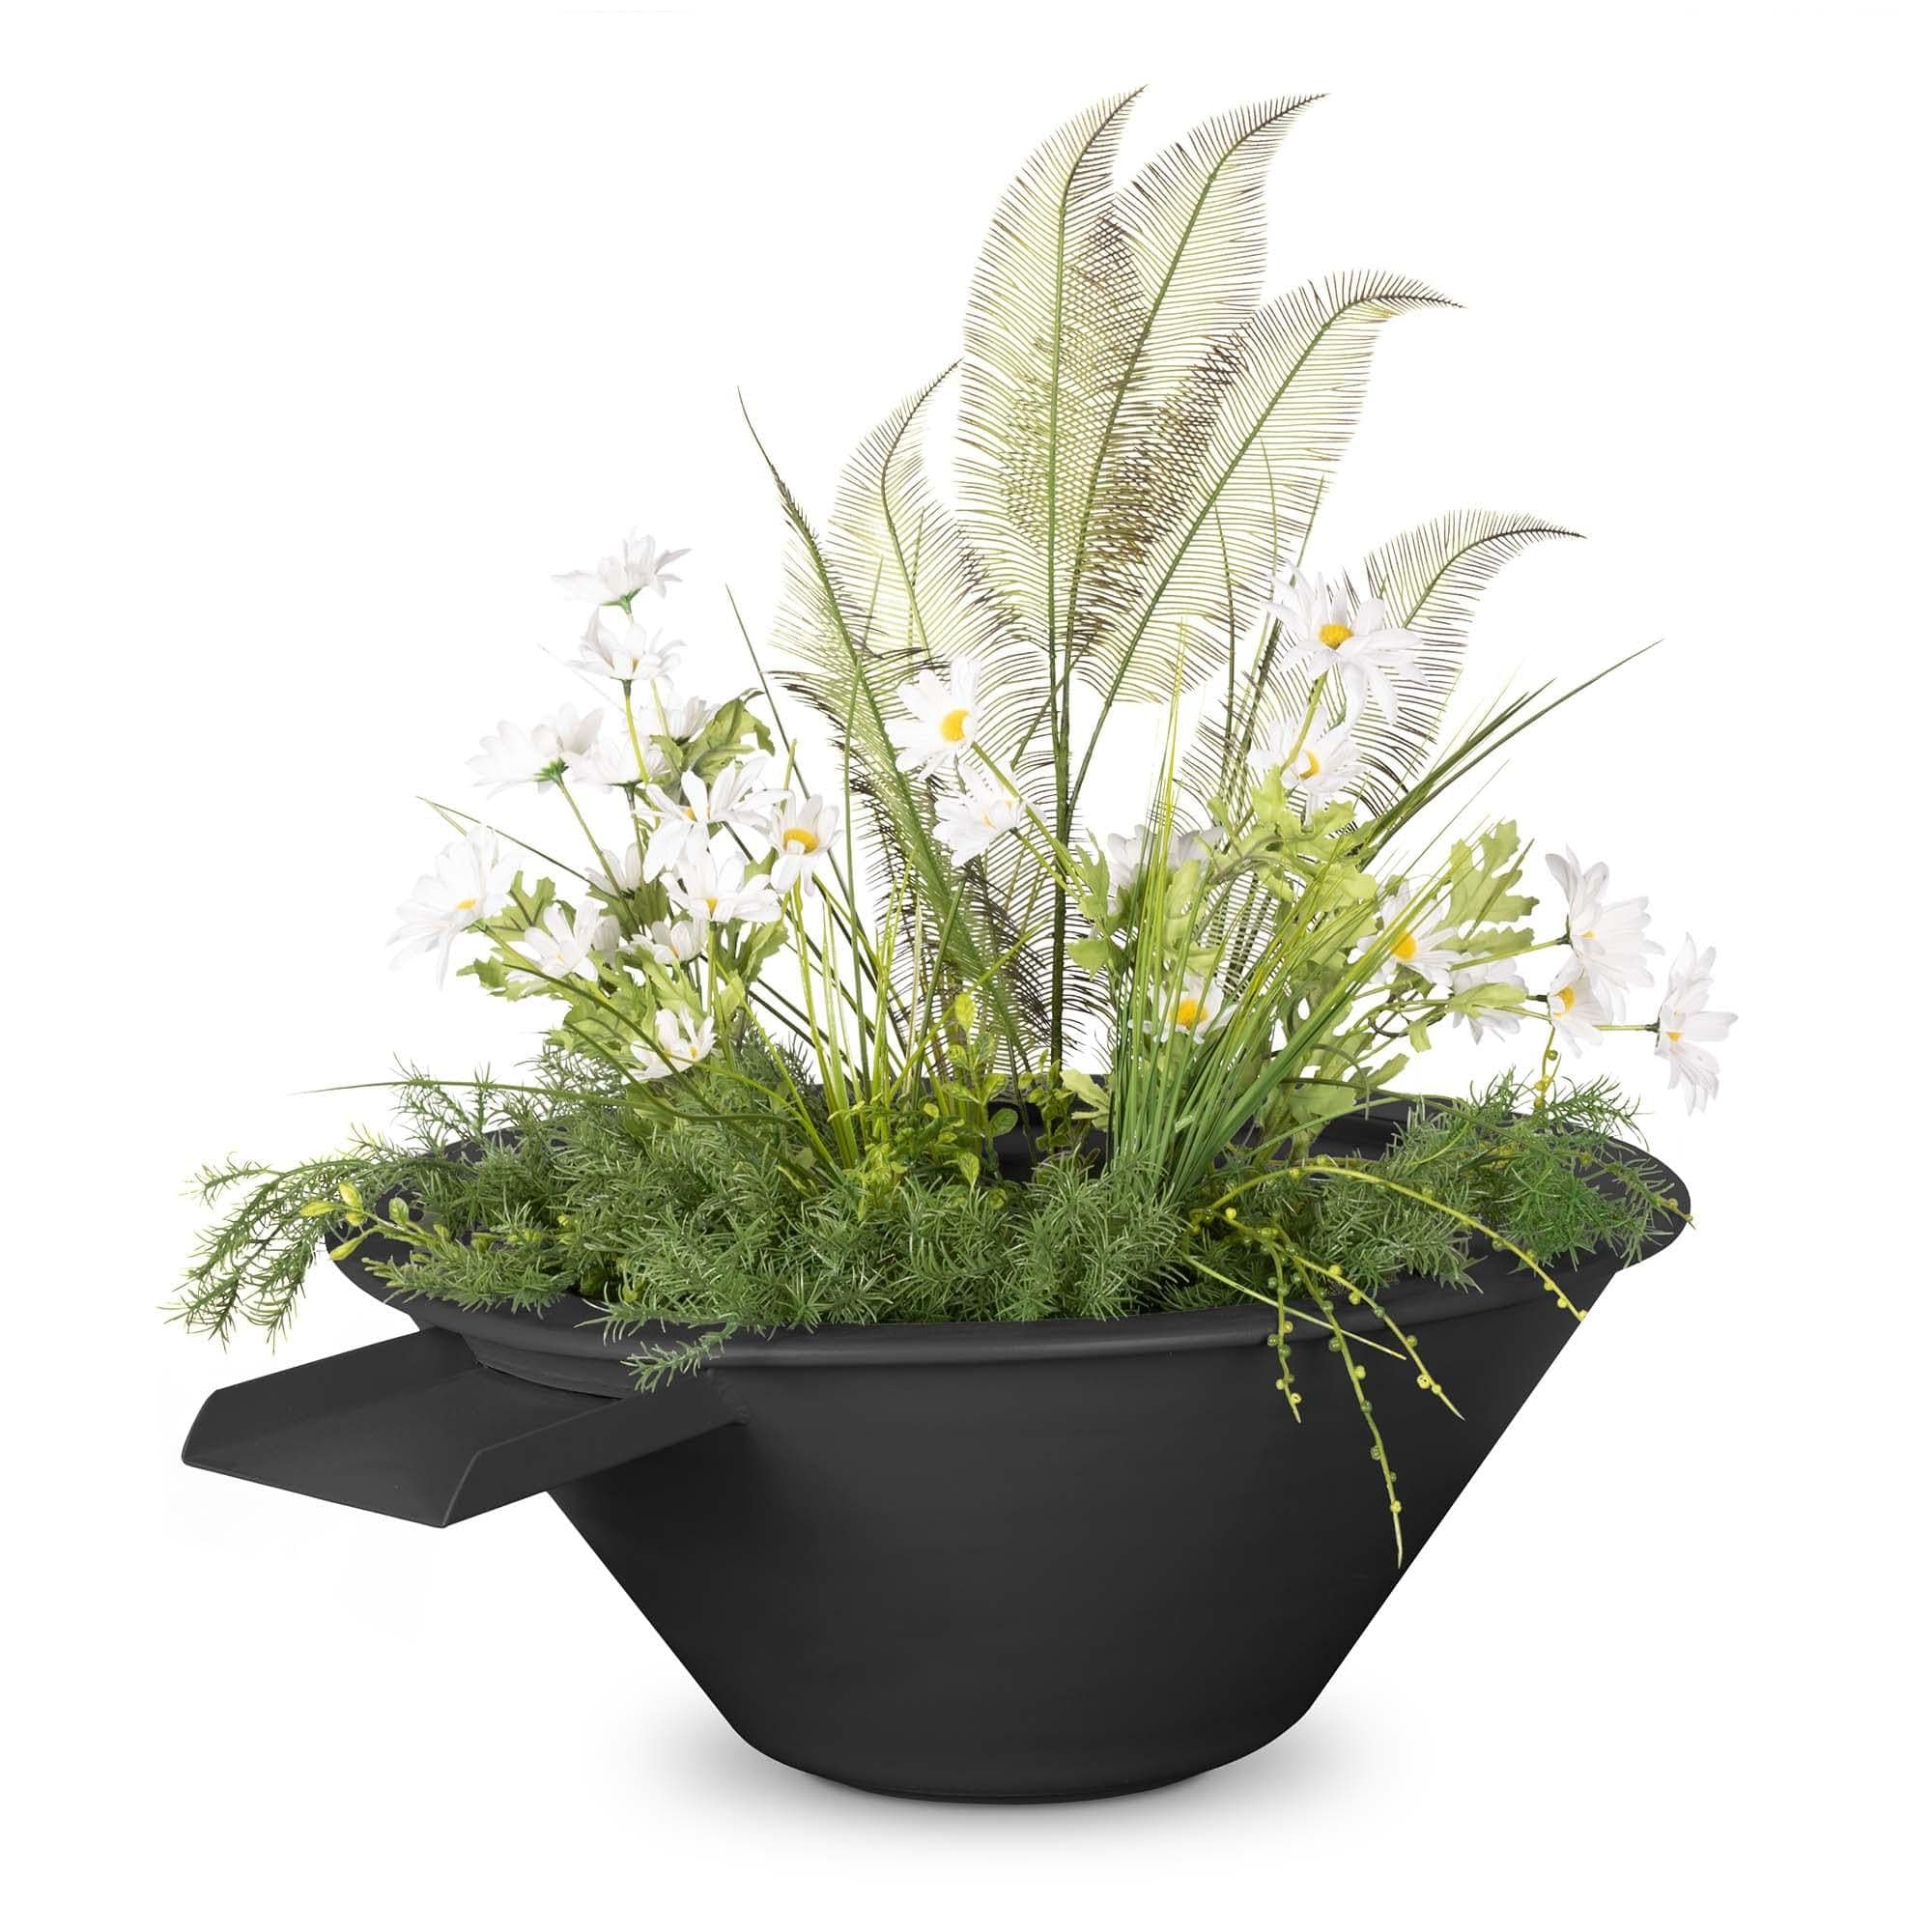 The Outdoor Plus Cazo Planter and Water Bowl - Metals